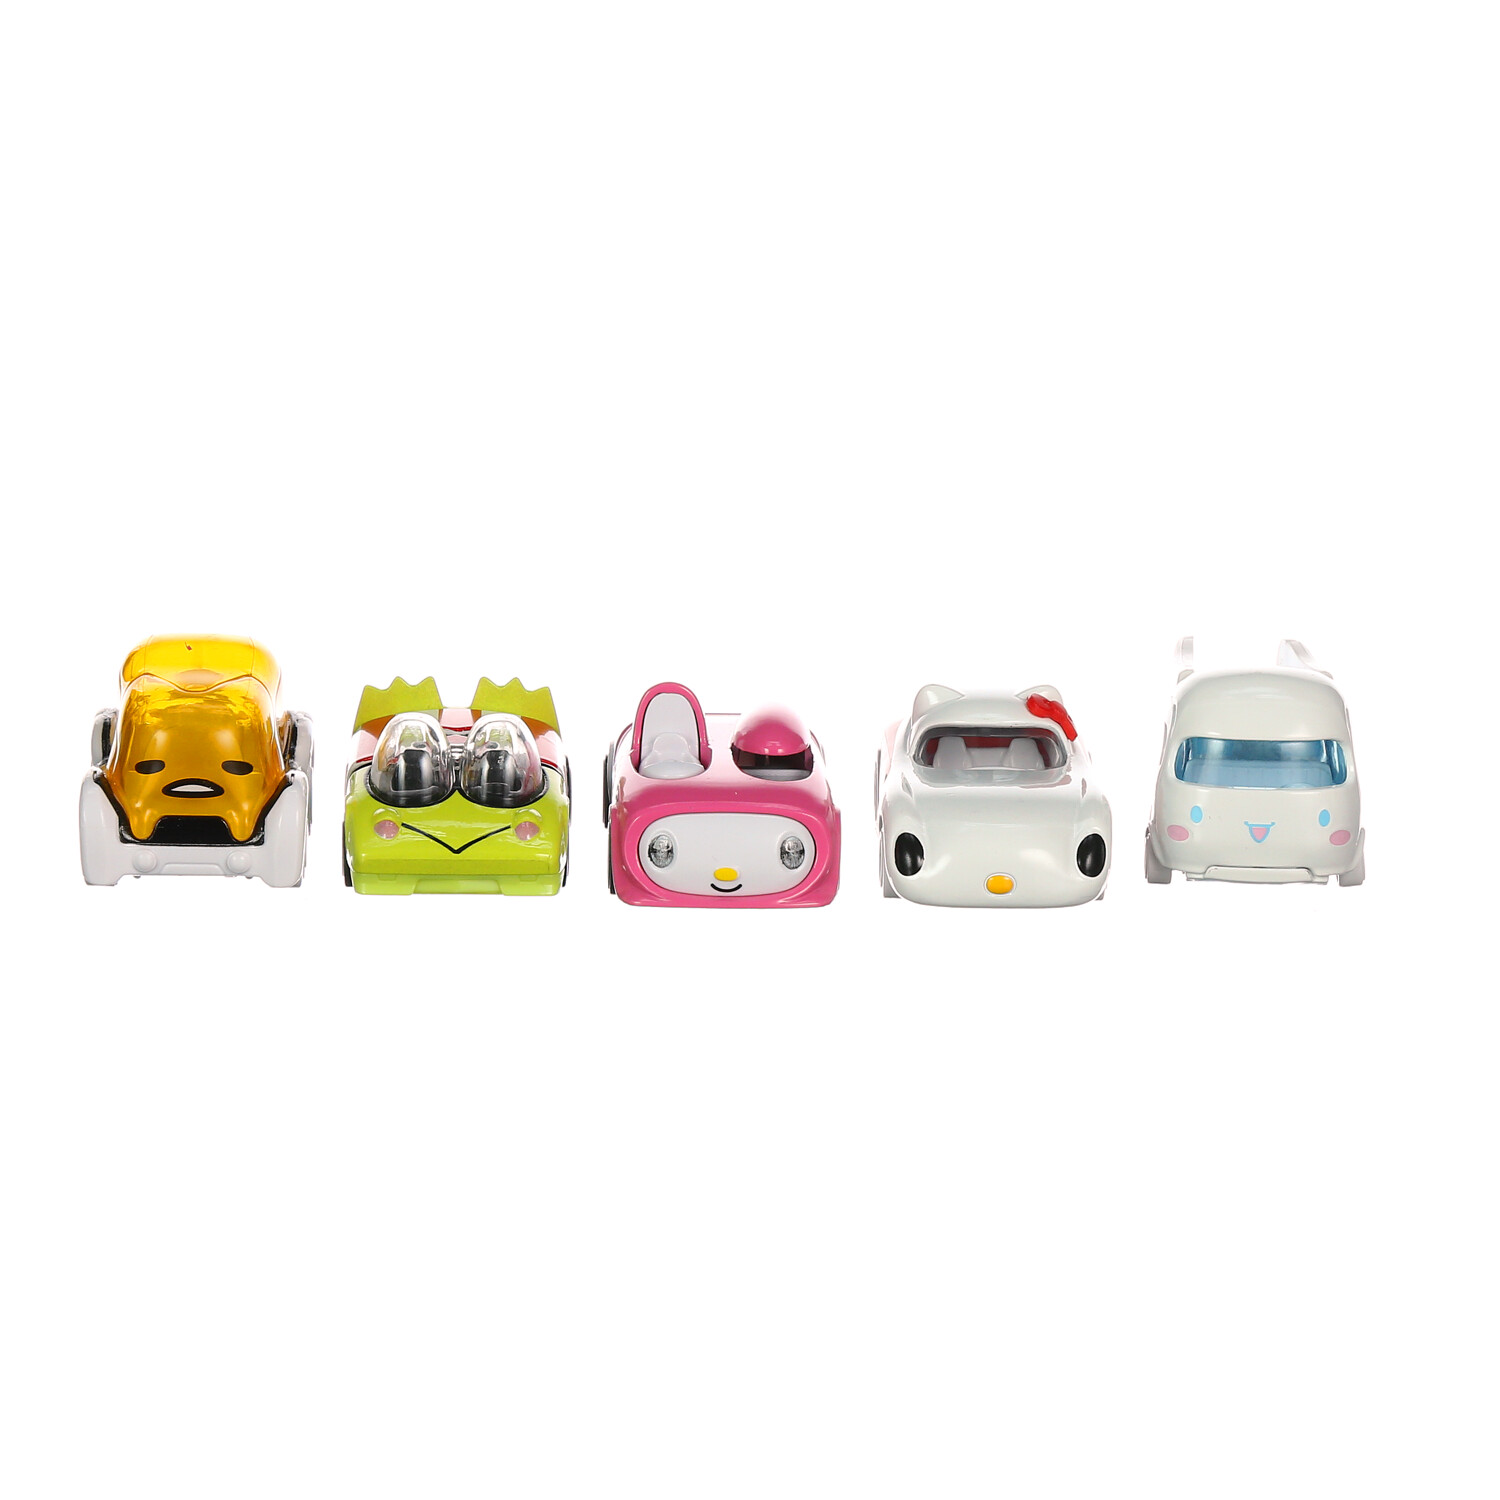 Hot Wheels Sanrio Set of 5 Character Toy Cars, Collectible Vehicles  Including Hello Kitty